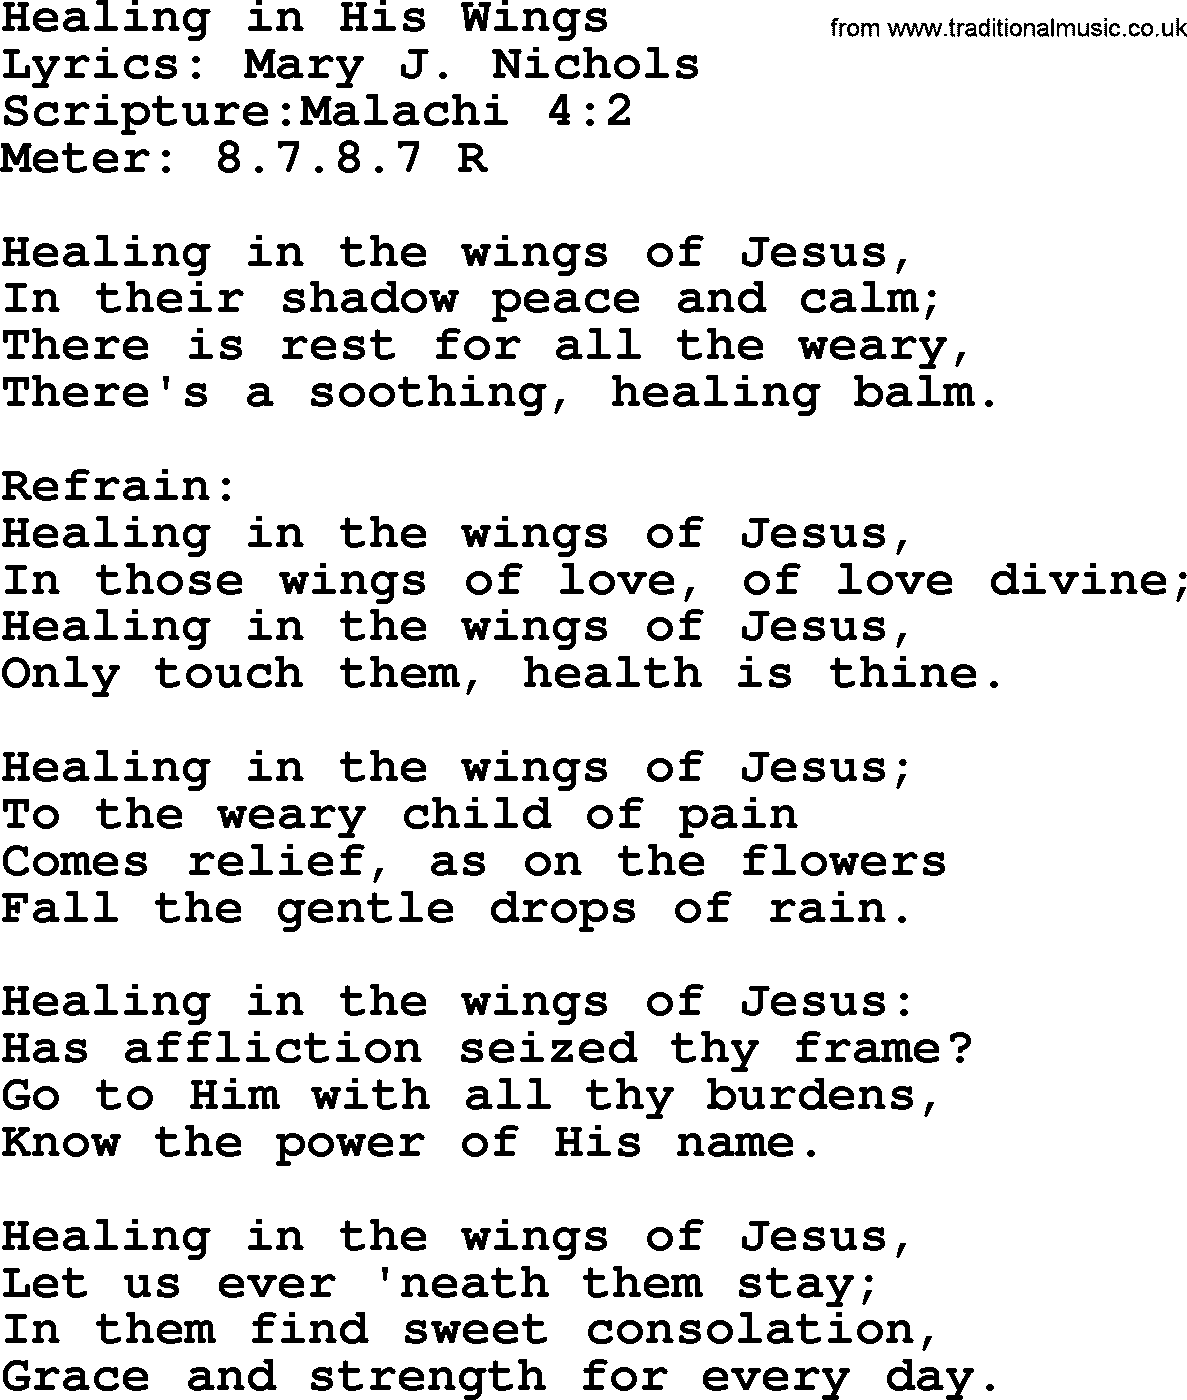 Hymns about  Angels, Hymn: Healing in His Wings, lyrics, sheet music, midi & Mp3 music with PDF